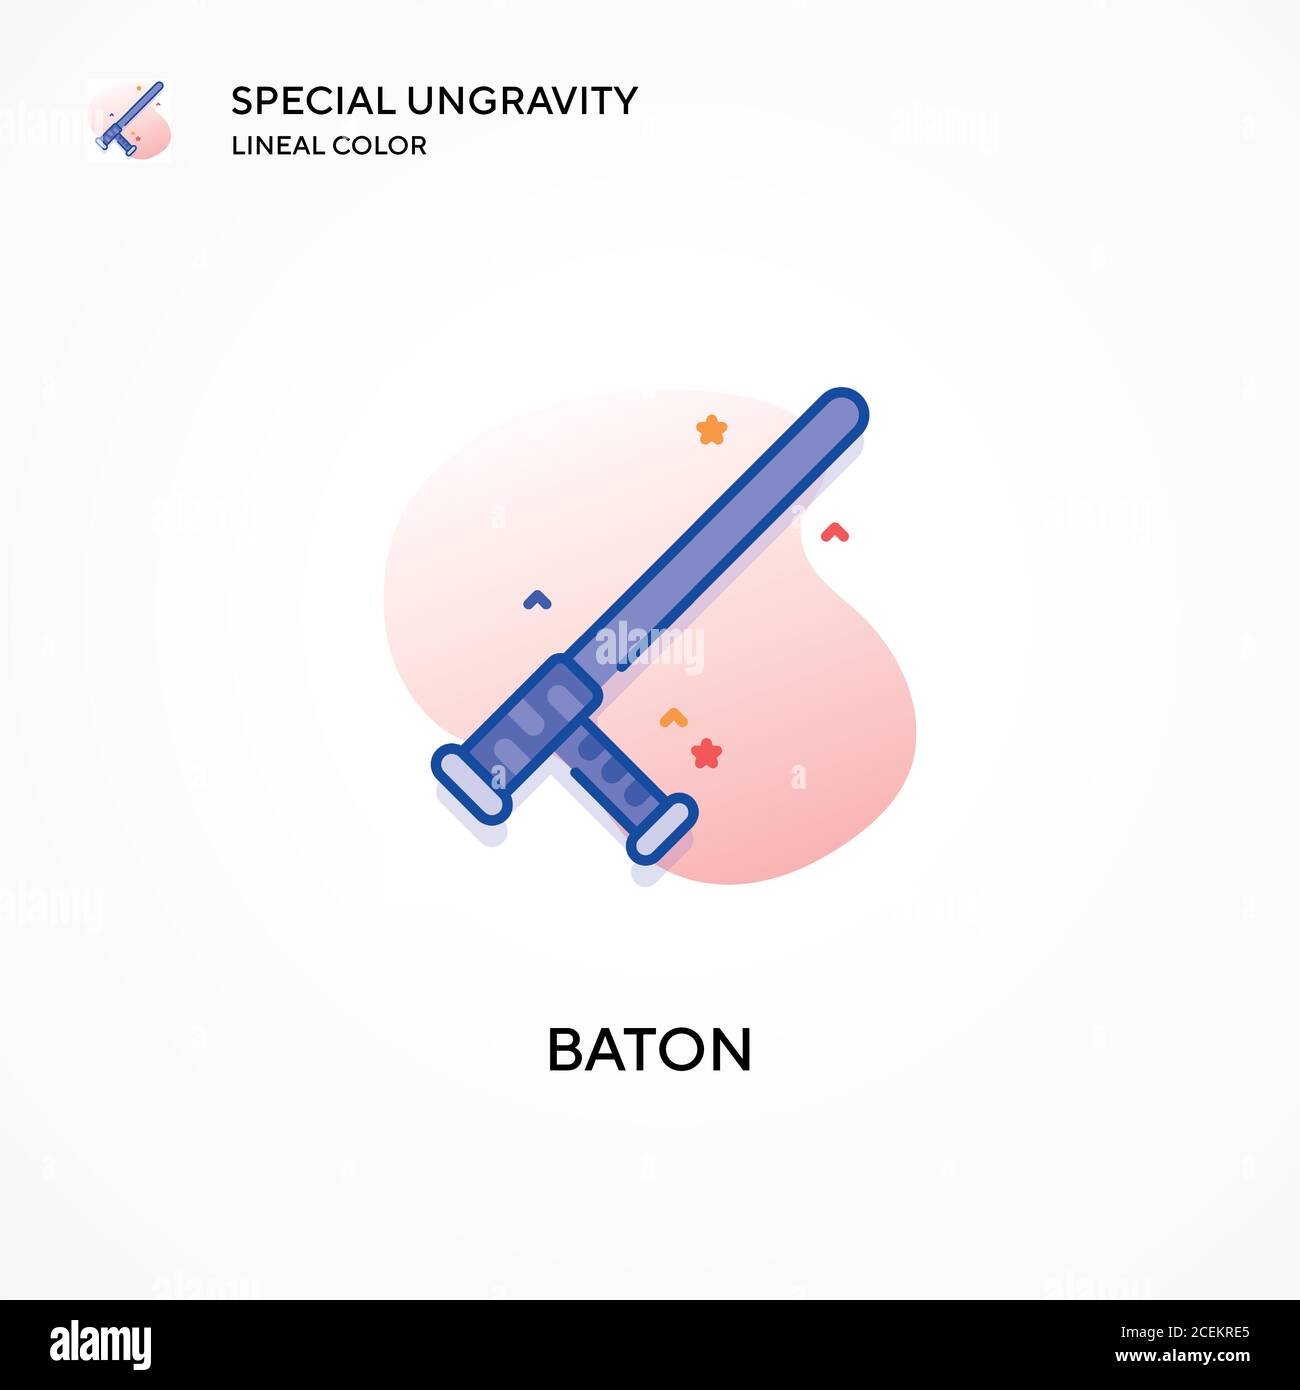 Baton special ungravity lineal color icon. Modern vector illustration concepts. Easy to edit and customize. Stock Vector